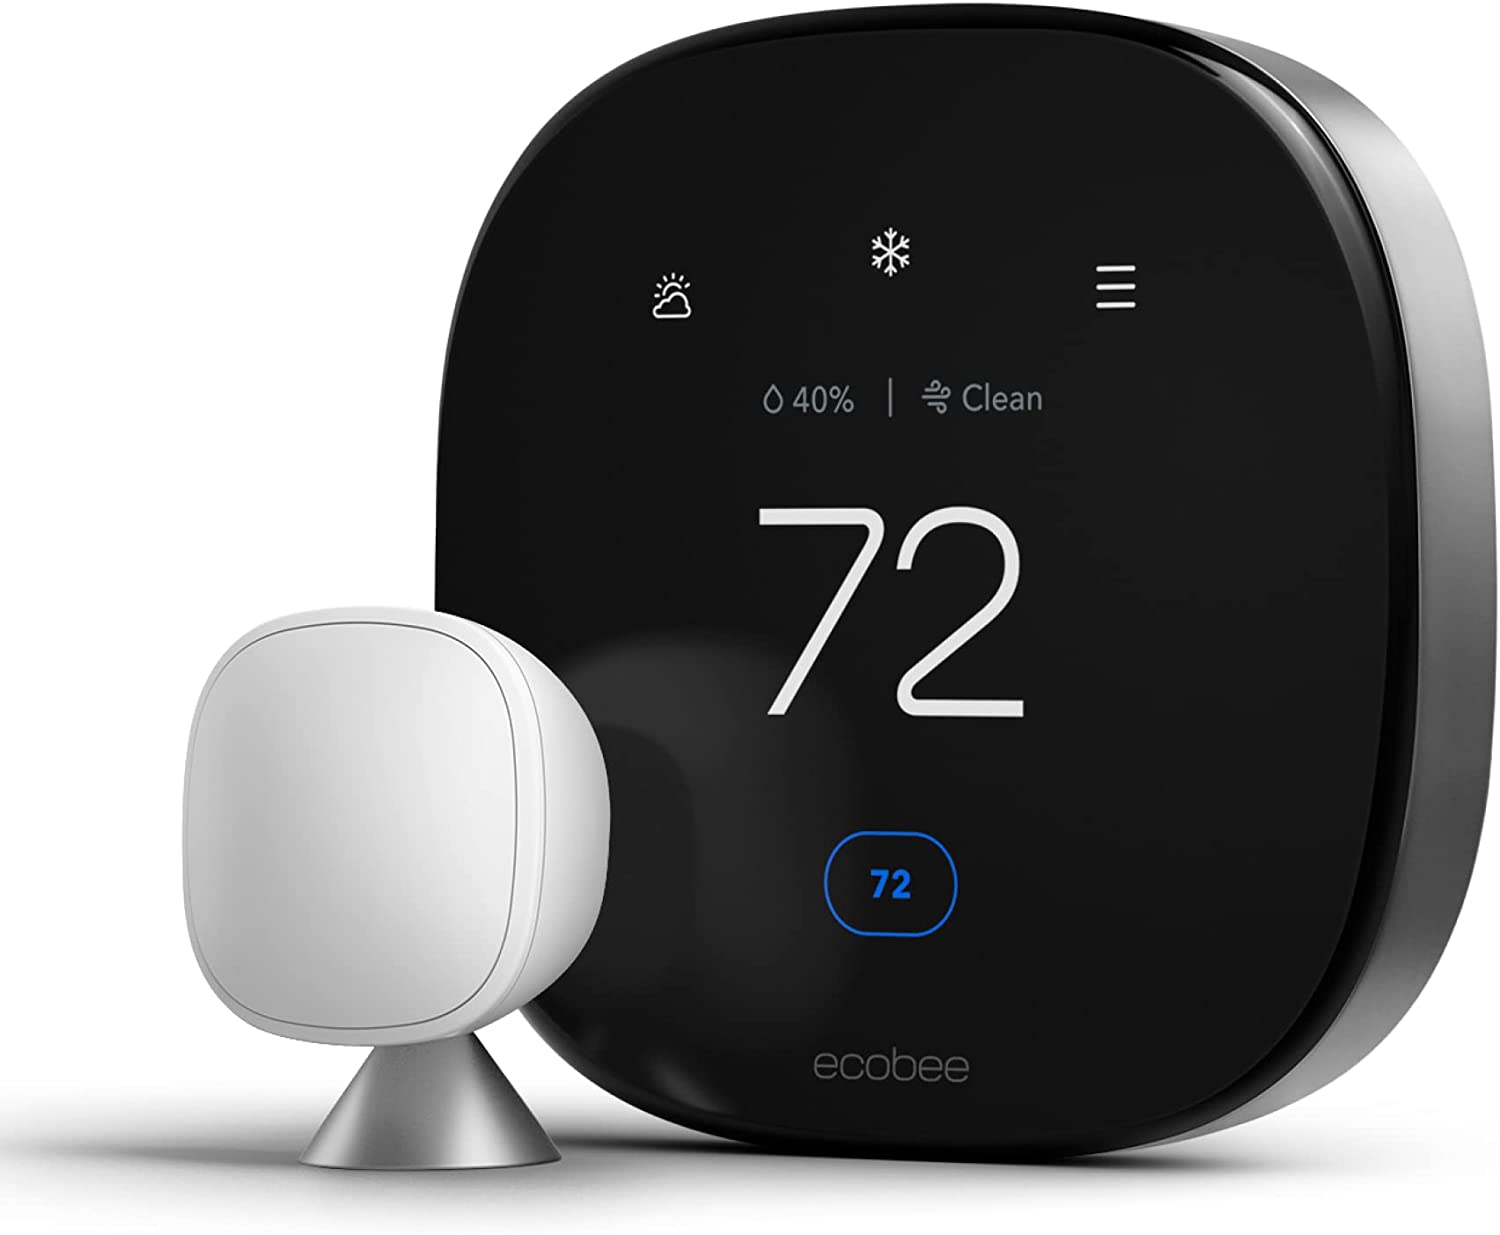 ecobee - Smart Thermostat Premium with Built in Air Quality Monitor and Smart Sensor, Siri and Alexa Compatible